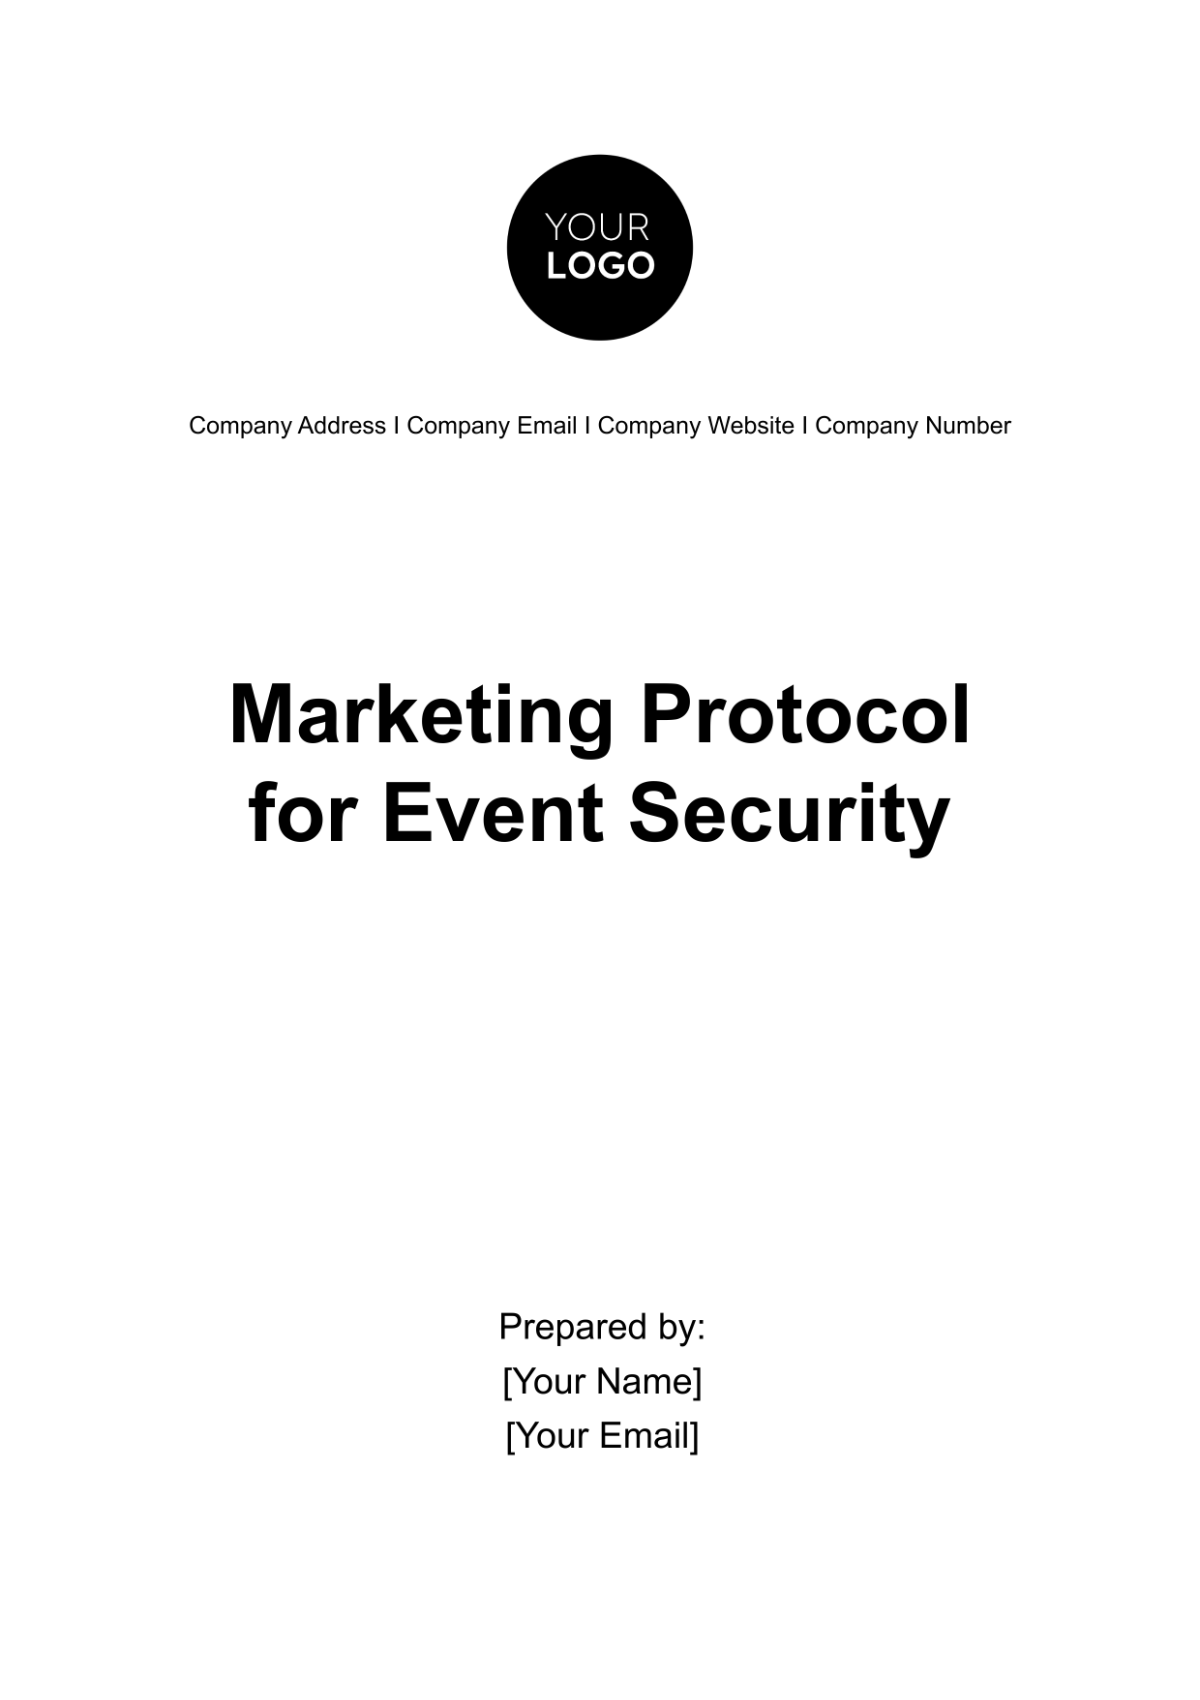 Free Marketing Protocol for Event Security Template